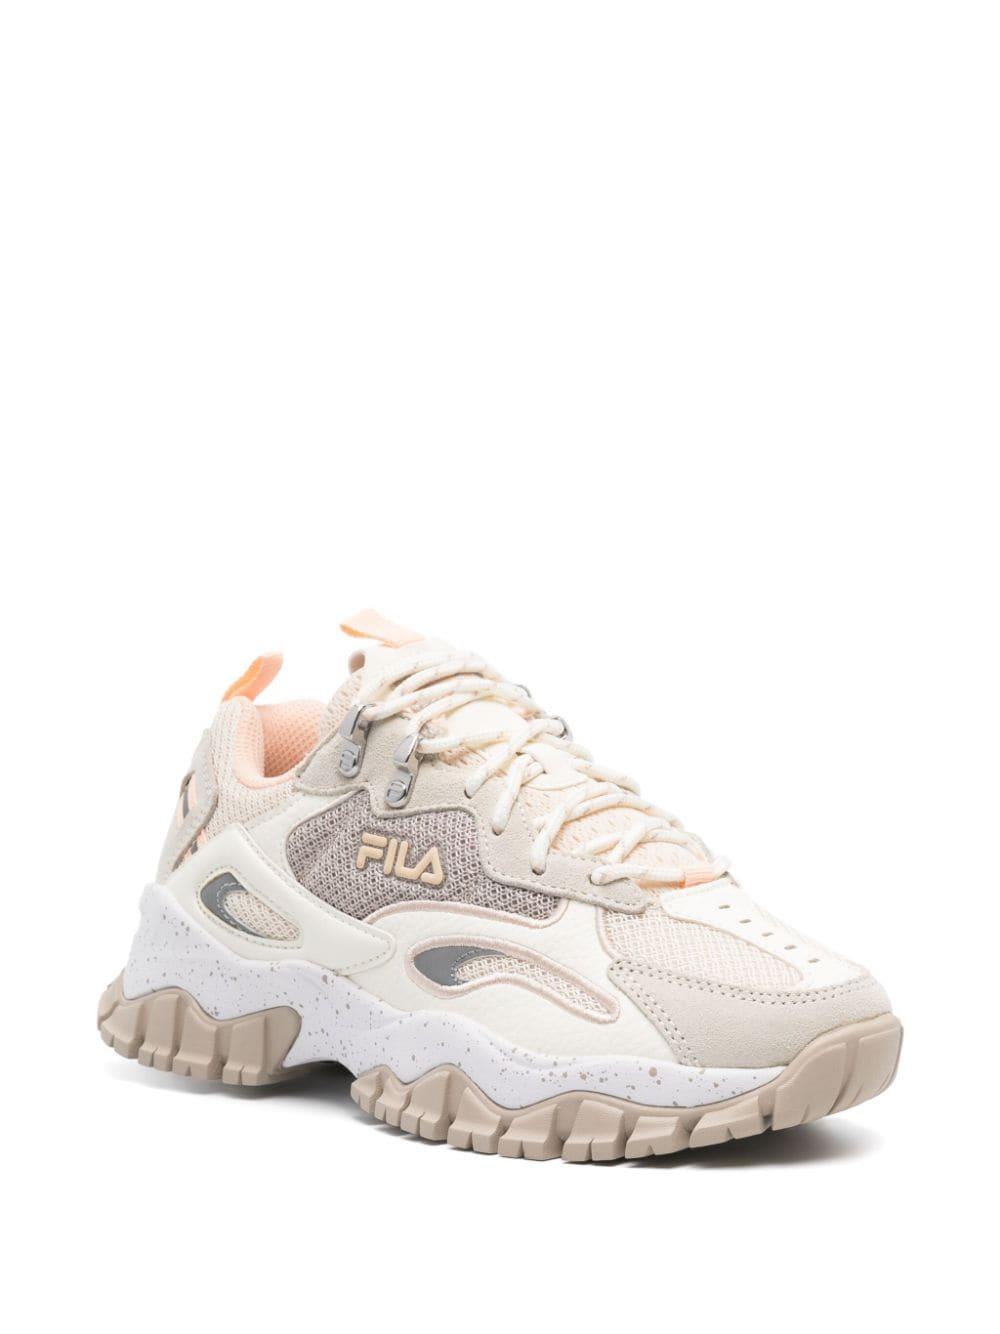 Fila Ray Tracer mesh sneakers - Neutrals